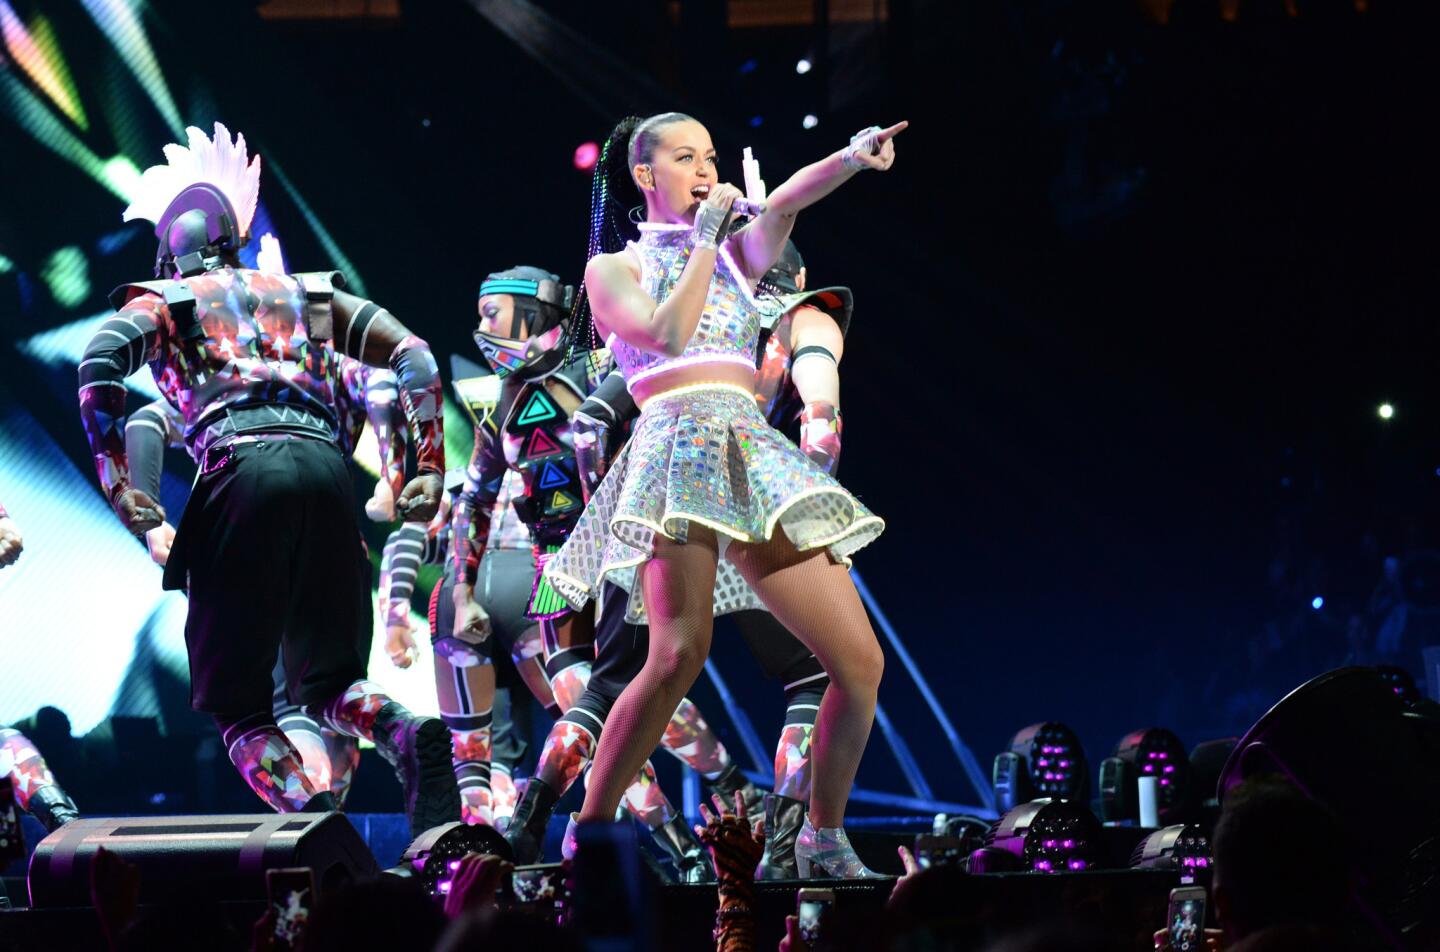 Katy Perry took the stage at Madison Square Garden as part of her Prismatic World Tour in a fittingly reflective crop top and skirt.